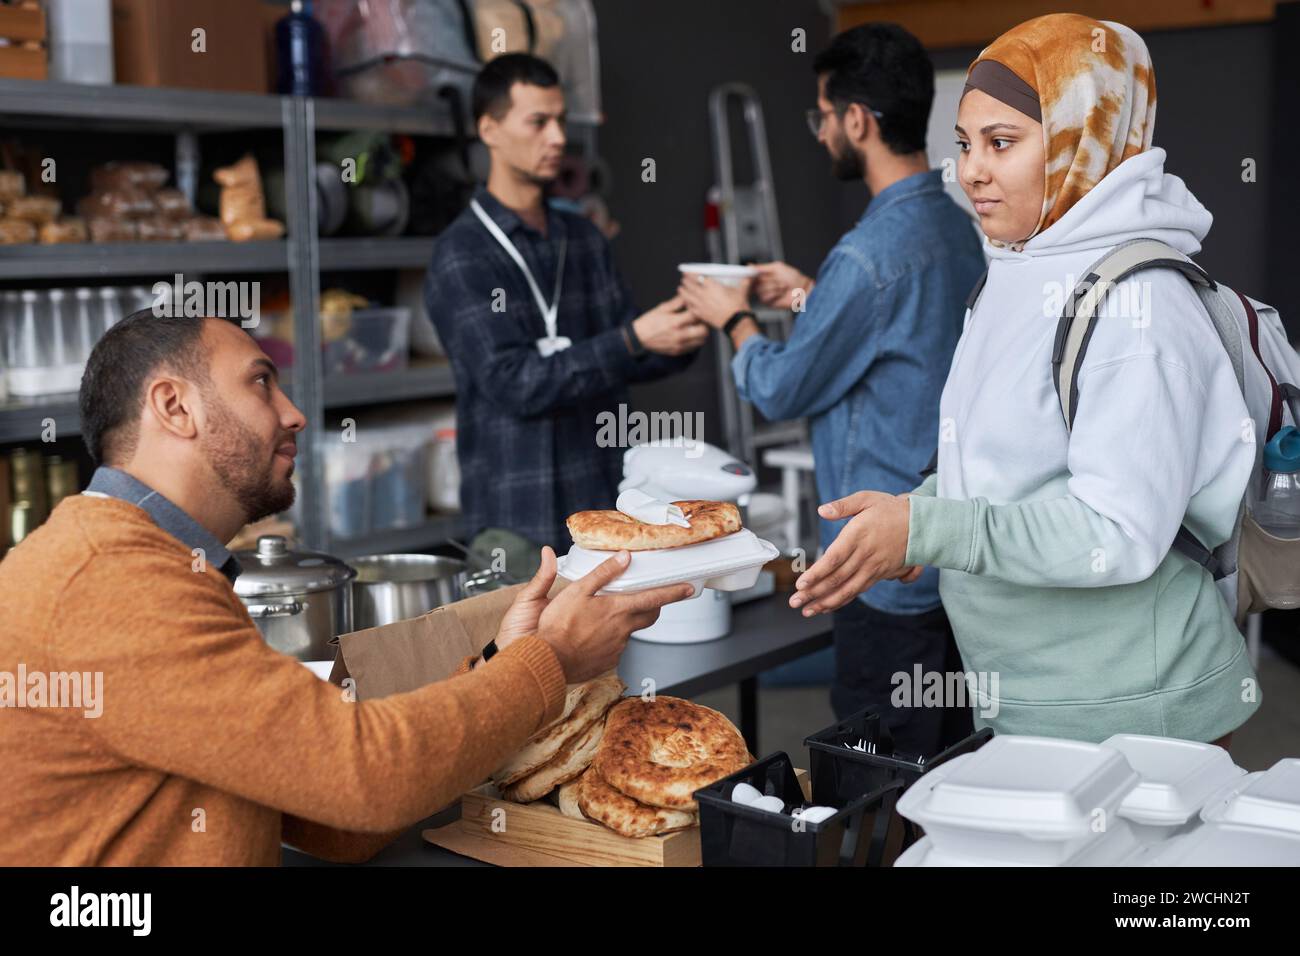 Side view portrait of young Middle Eastern woman wearing headcover receiving free food and donations at refugee help center Stock Photo